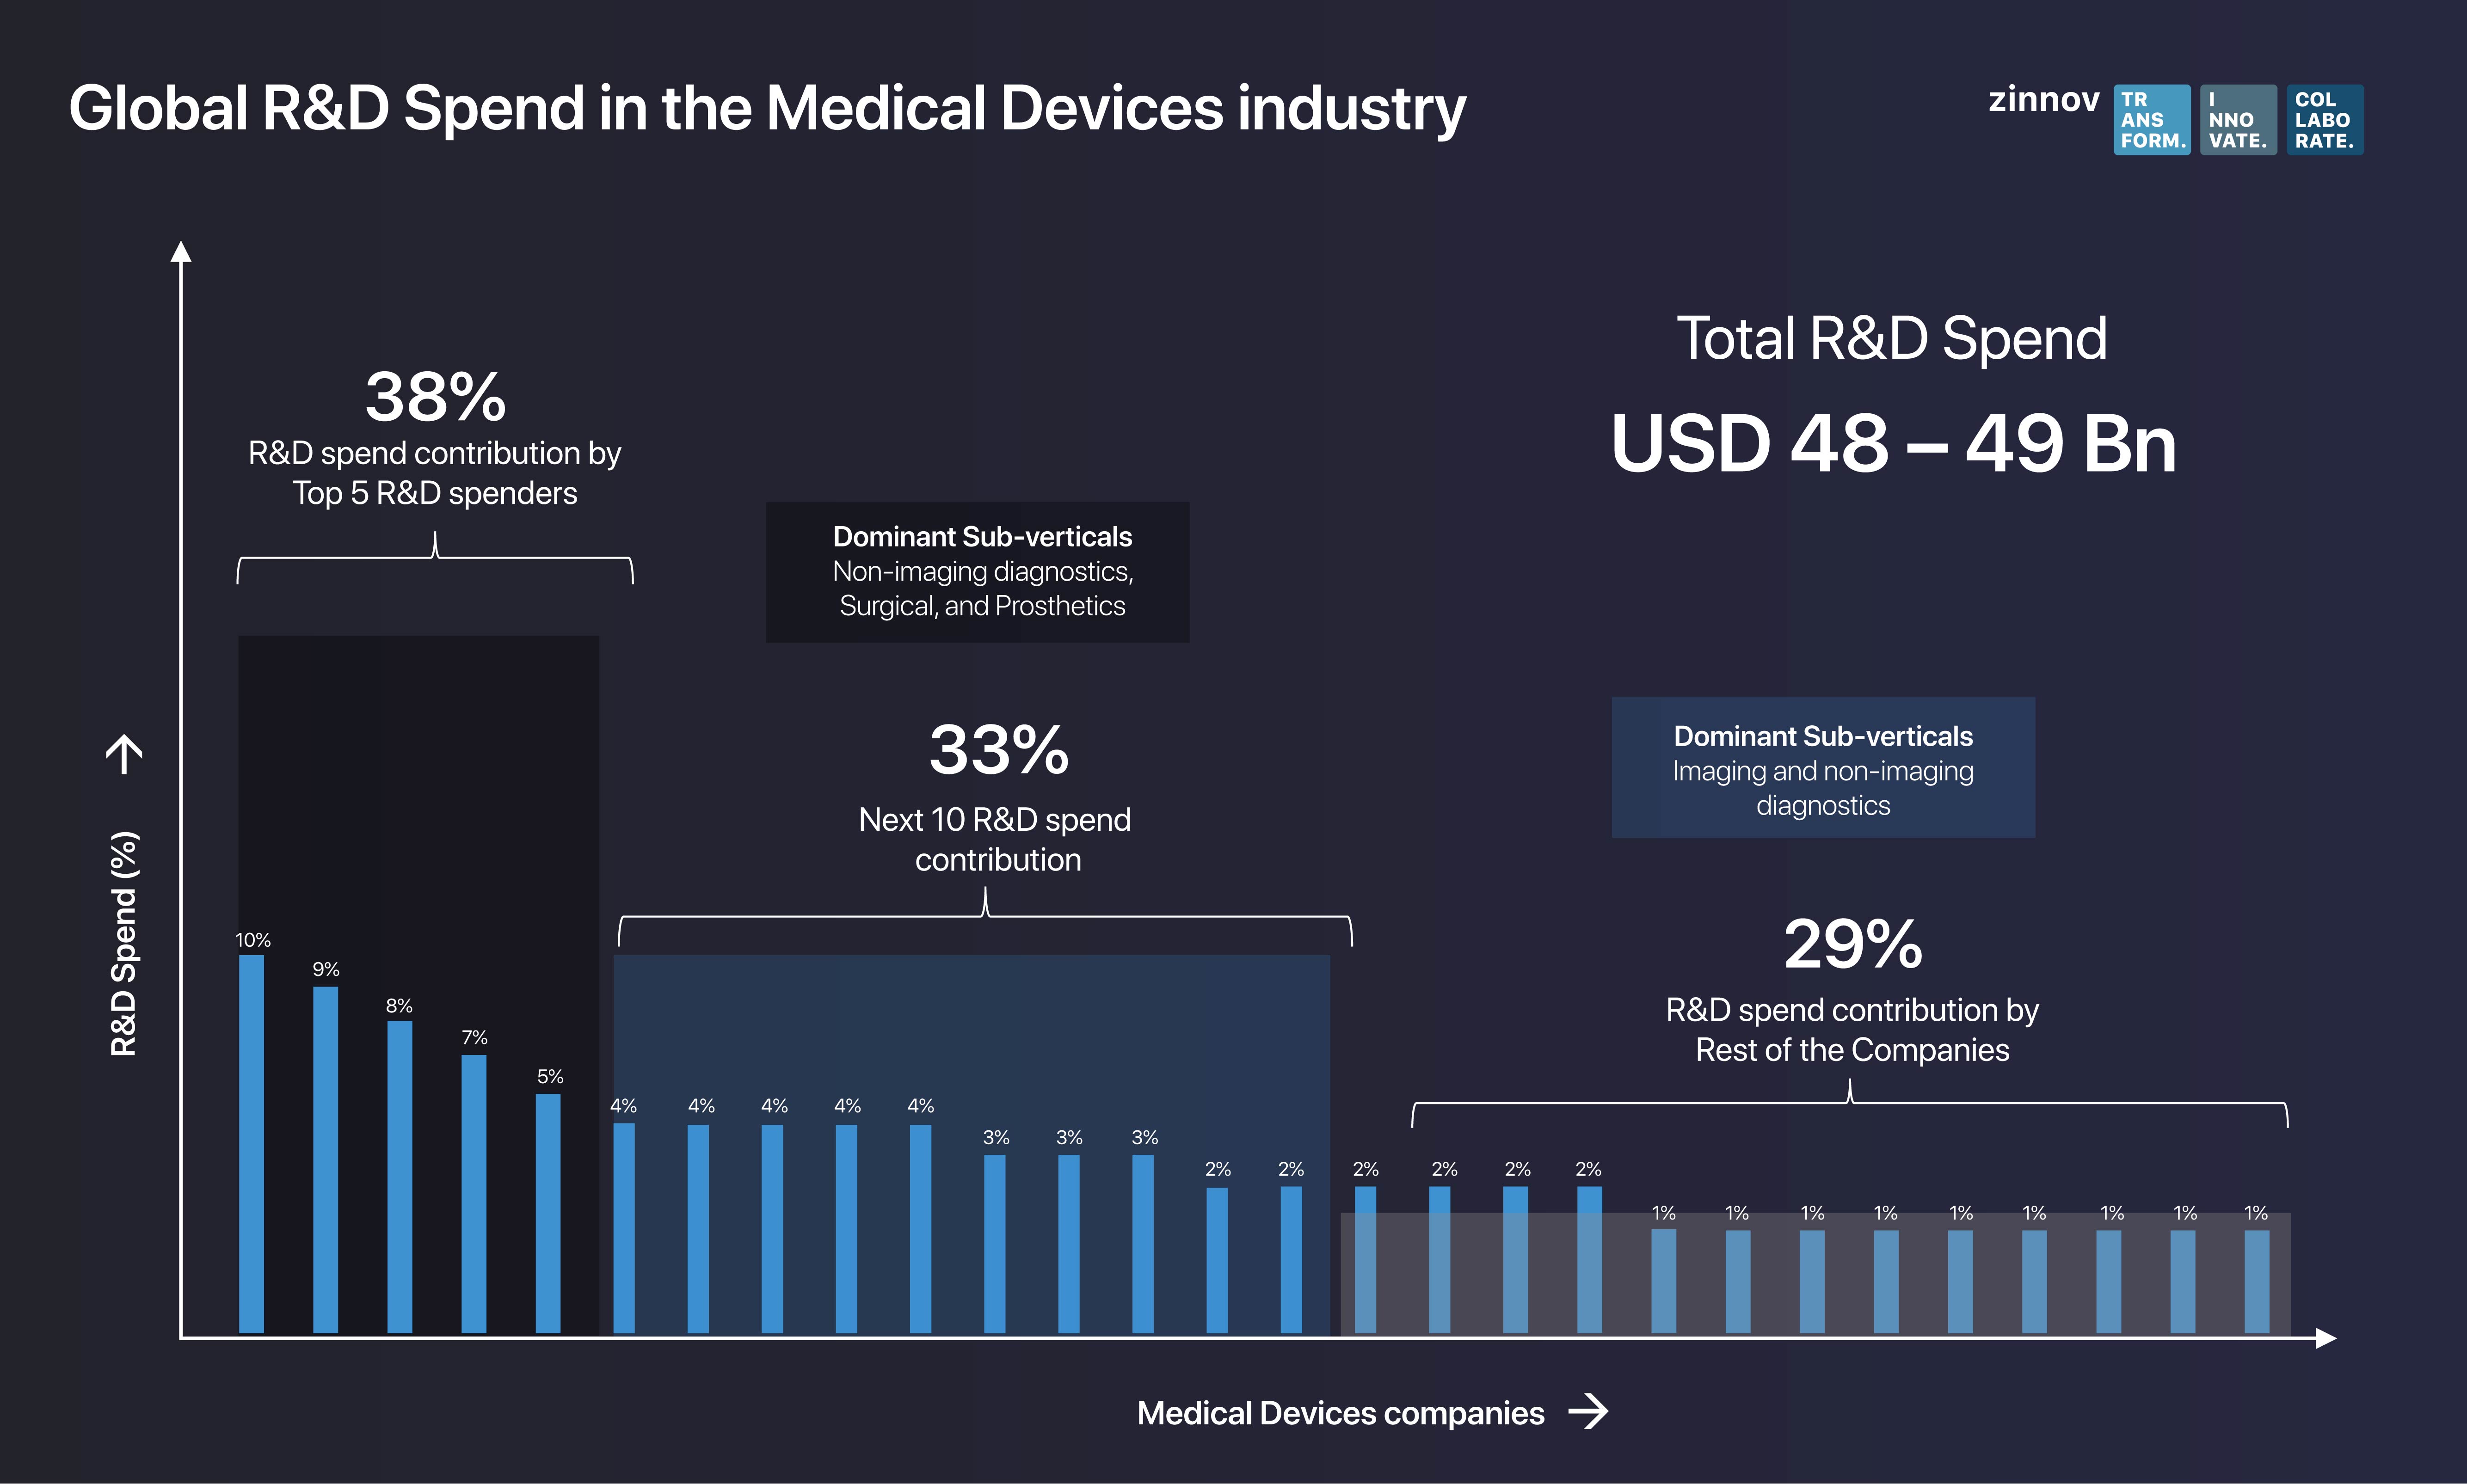 Global R&D spend in the Medical Devices industry